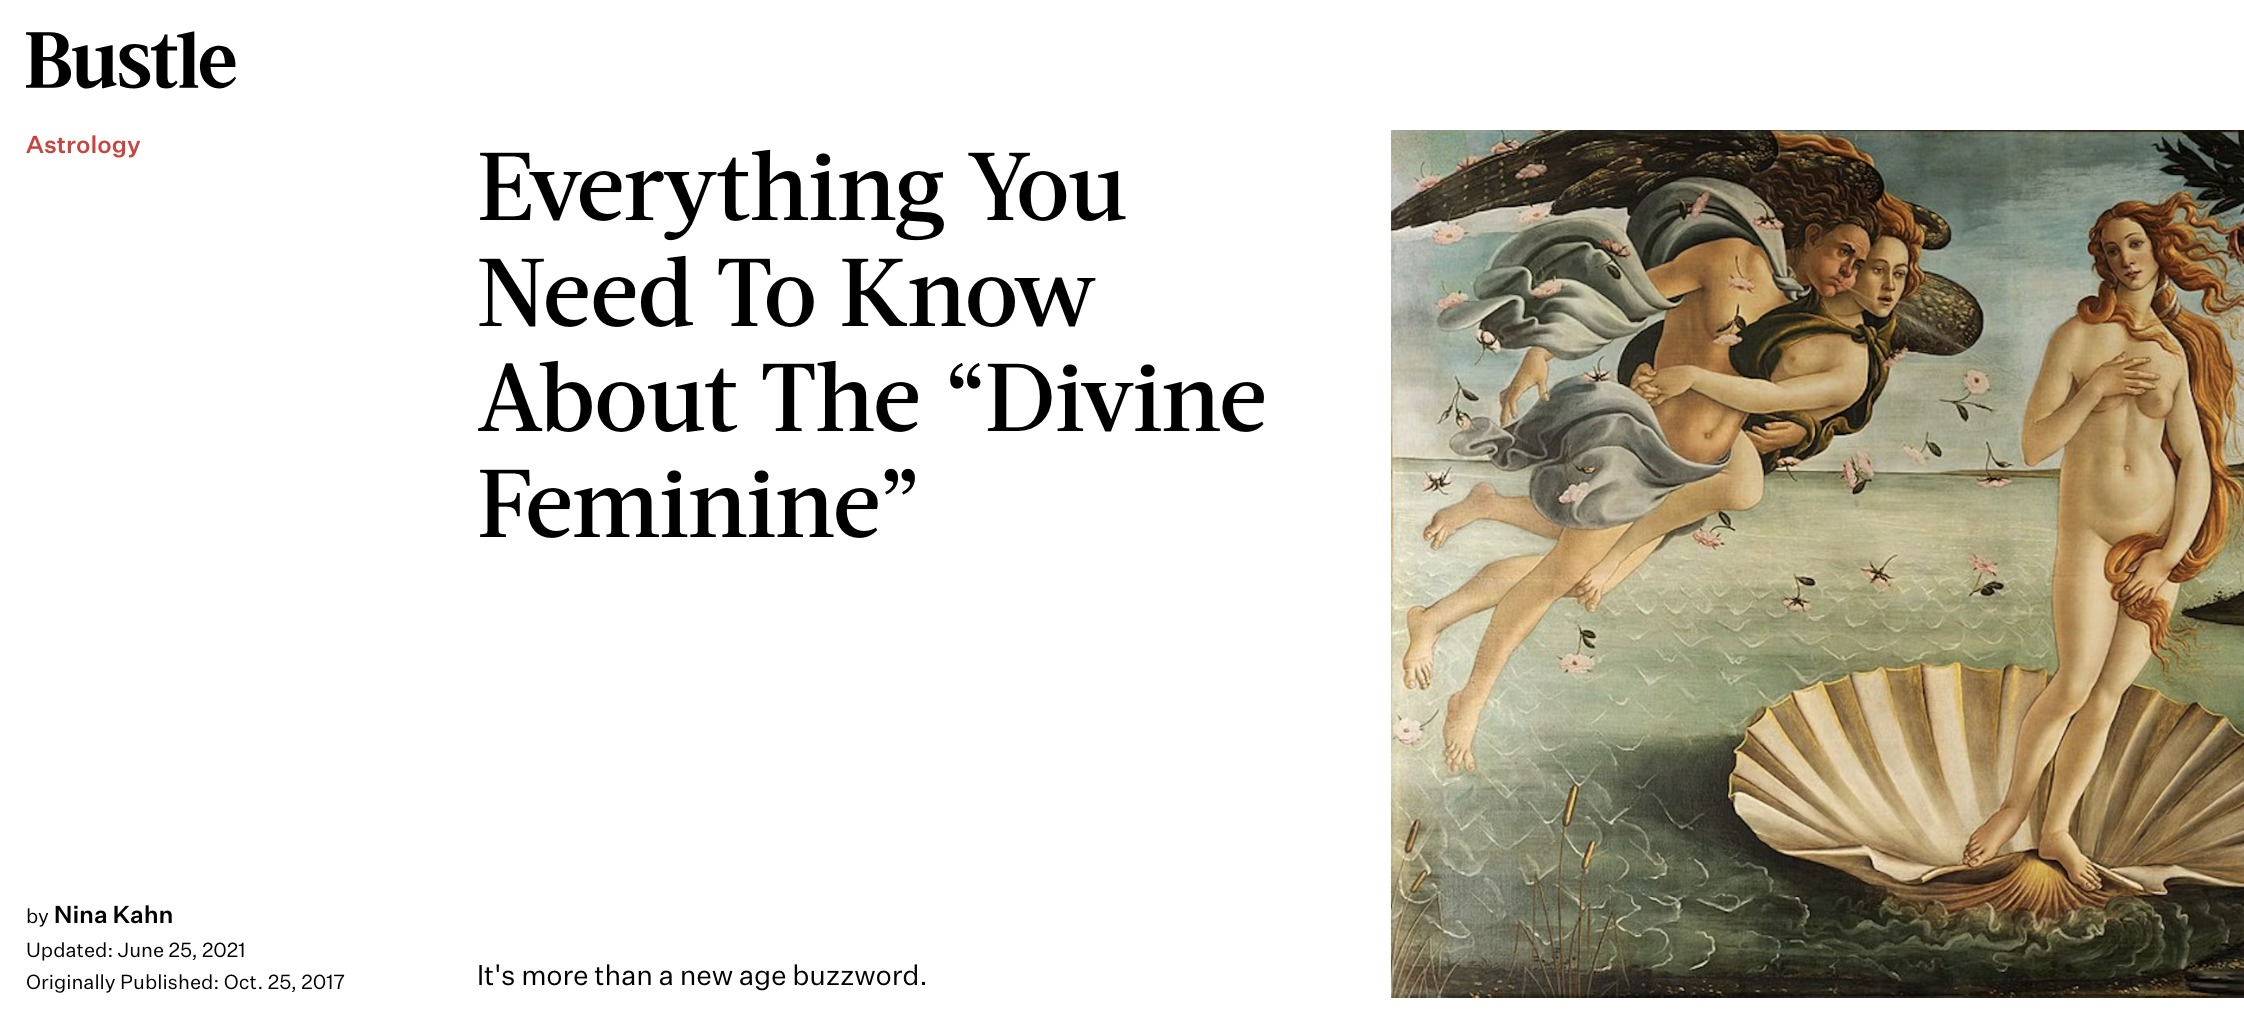 Everything You Need To Know About The "Divine Feminine" (Bustle) thumbnail